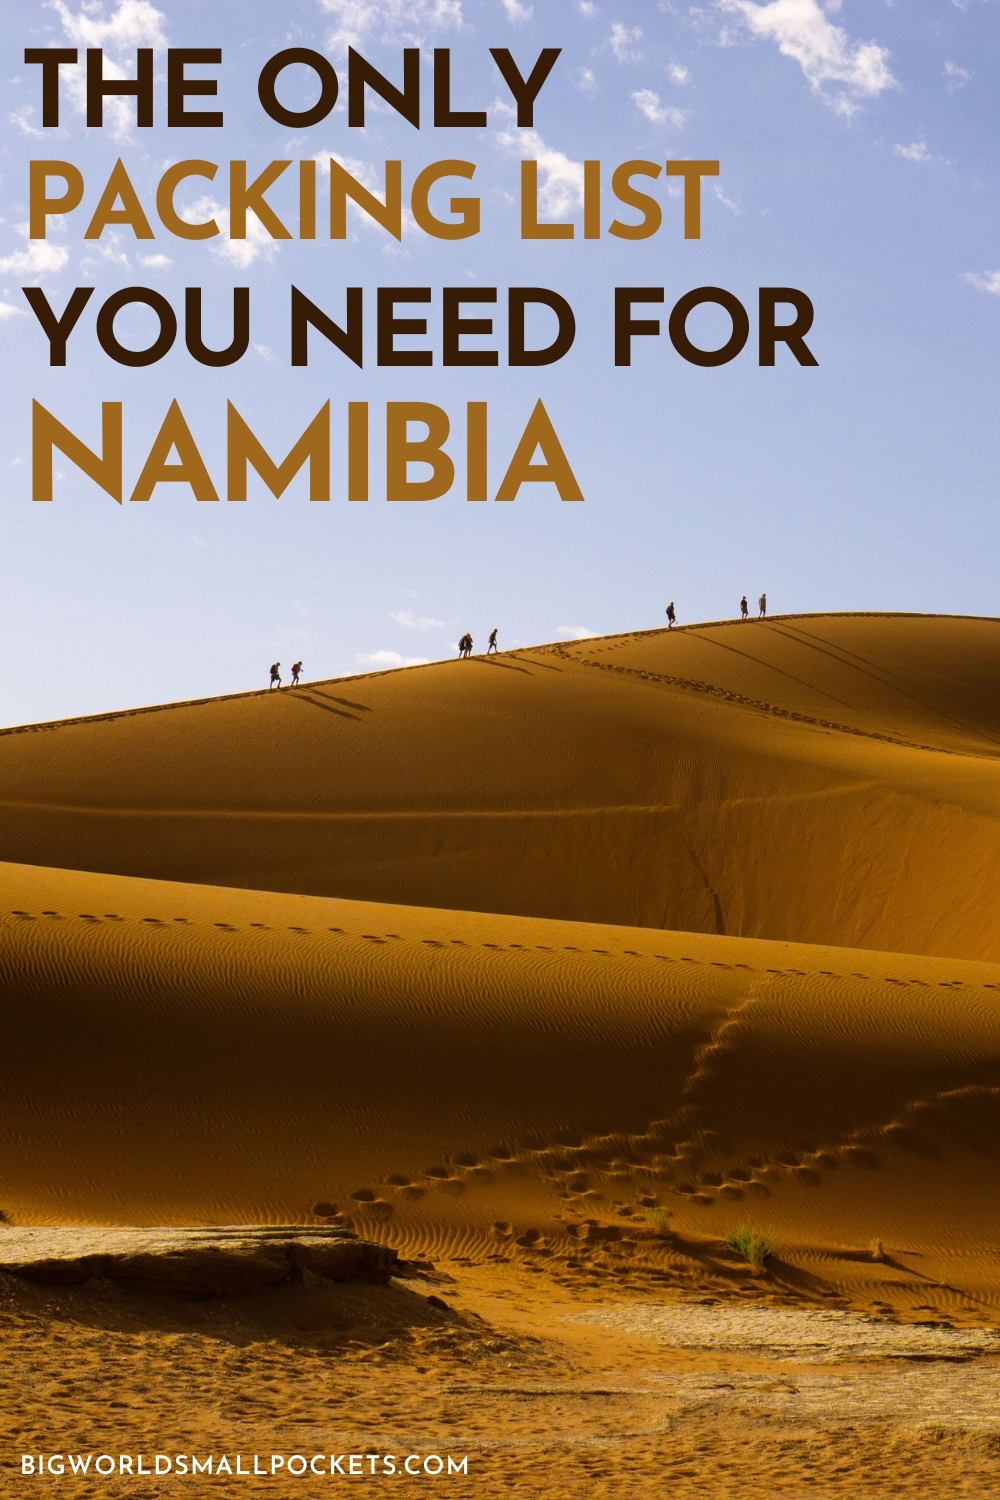 The Only Packing List for Namibia You Need!